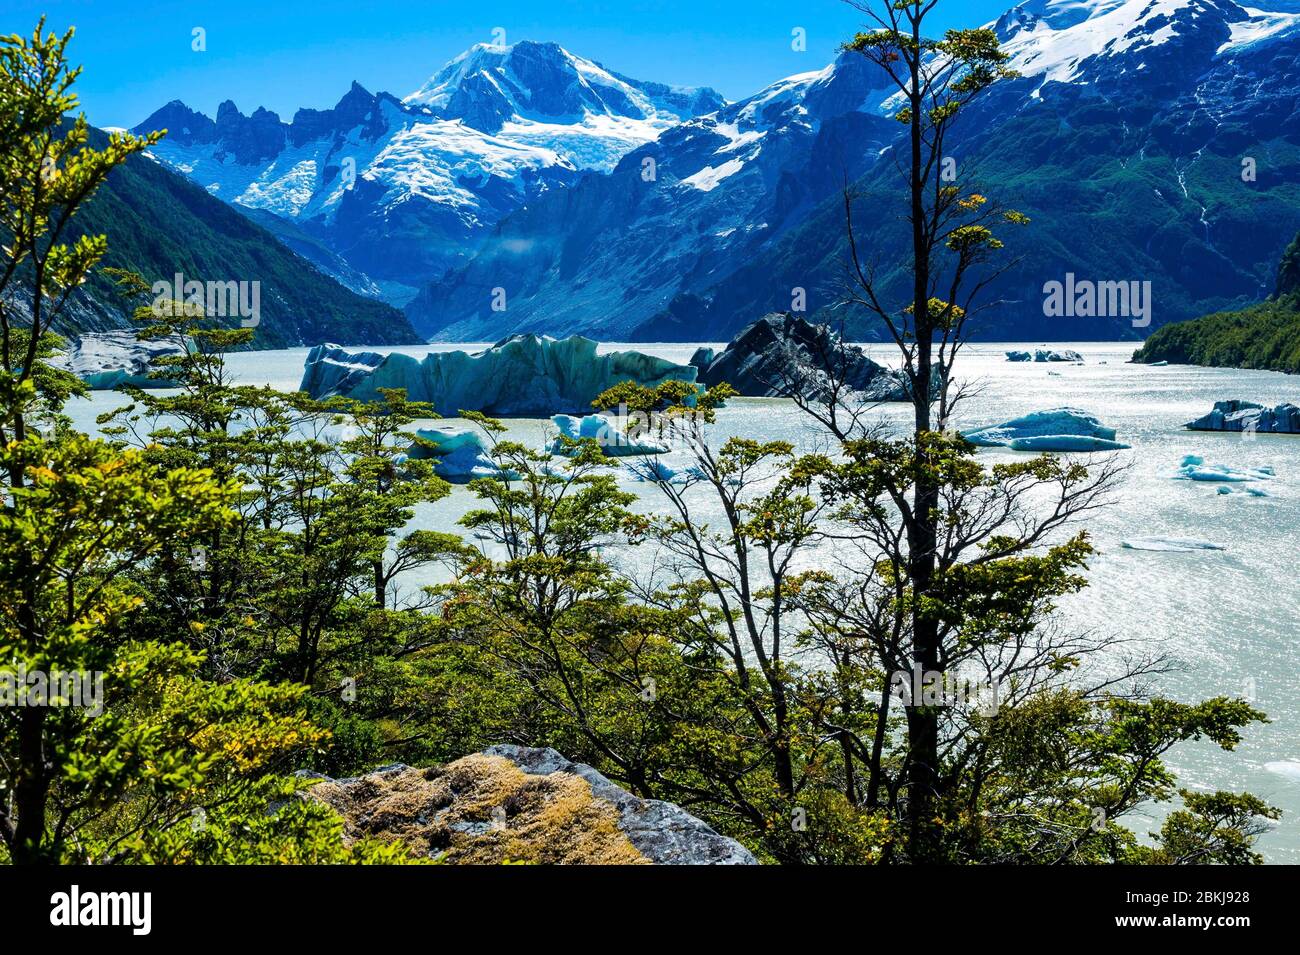 Chile, Patagonia, Aysen, Coyhaique, icebergs drift on lago Fiero, in the heart of the lenga forest, or beeches of Tierra del Fuego, Nothofagus pumilio Stock Photo